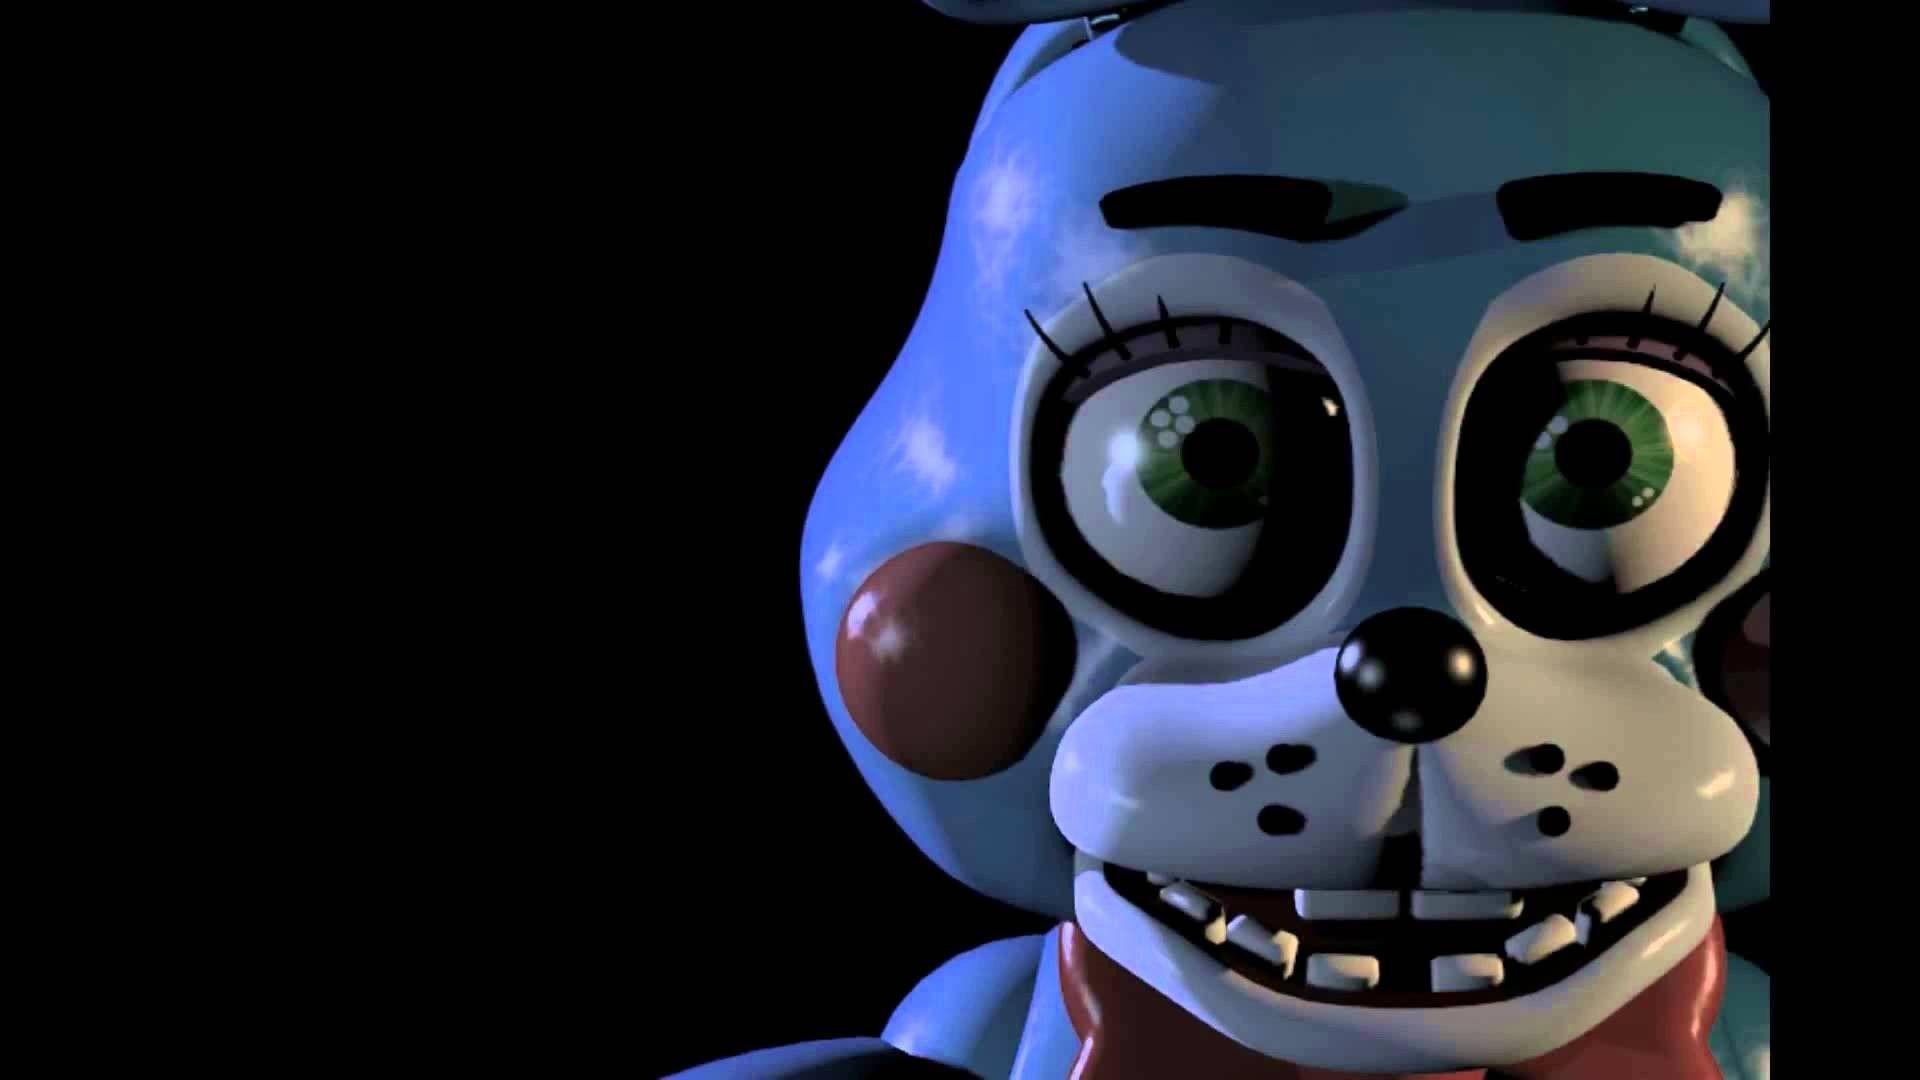 The protagonist of the game Five Nights at Freddy&;s